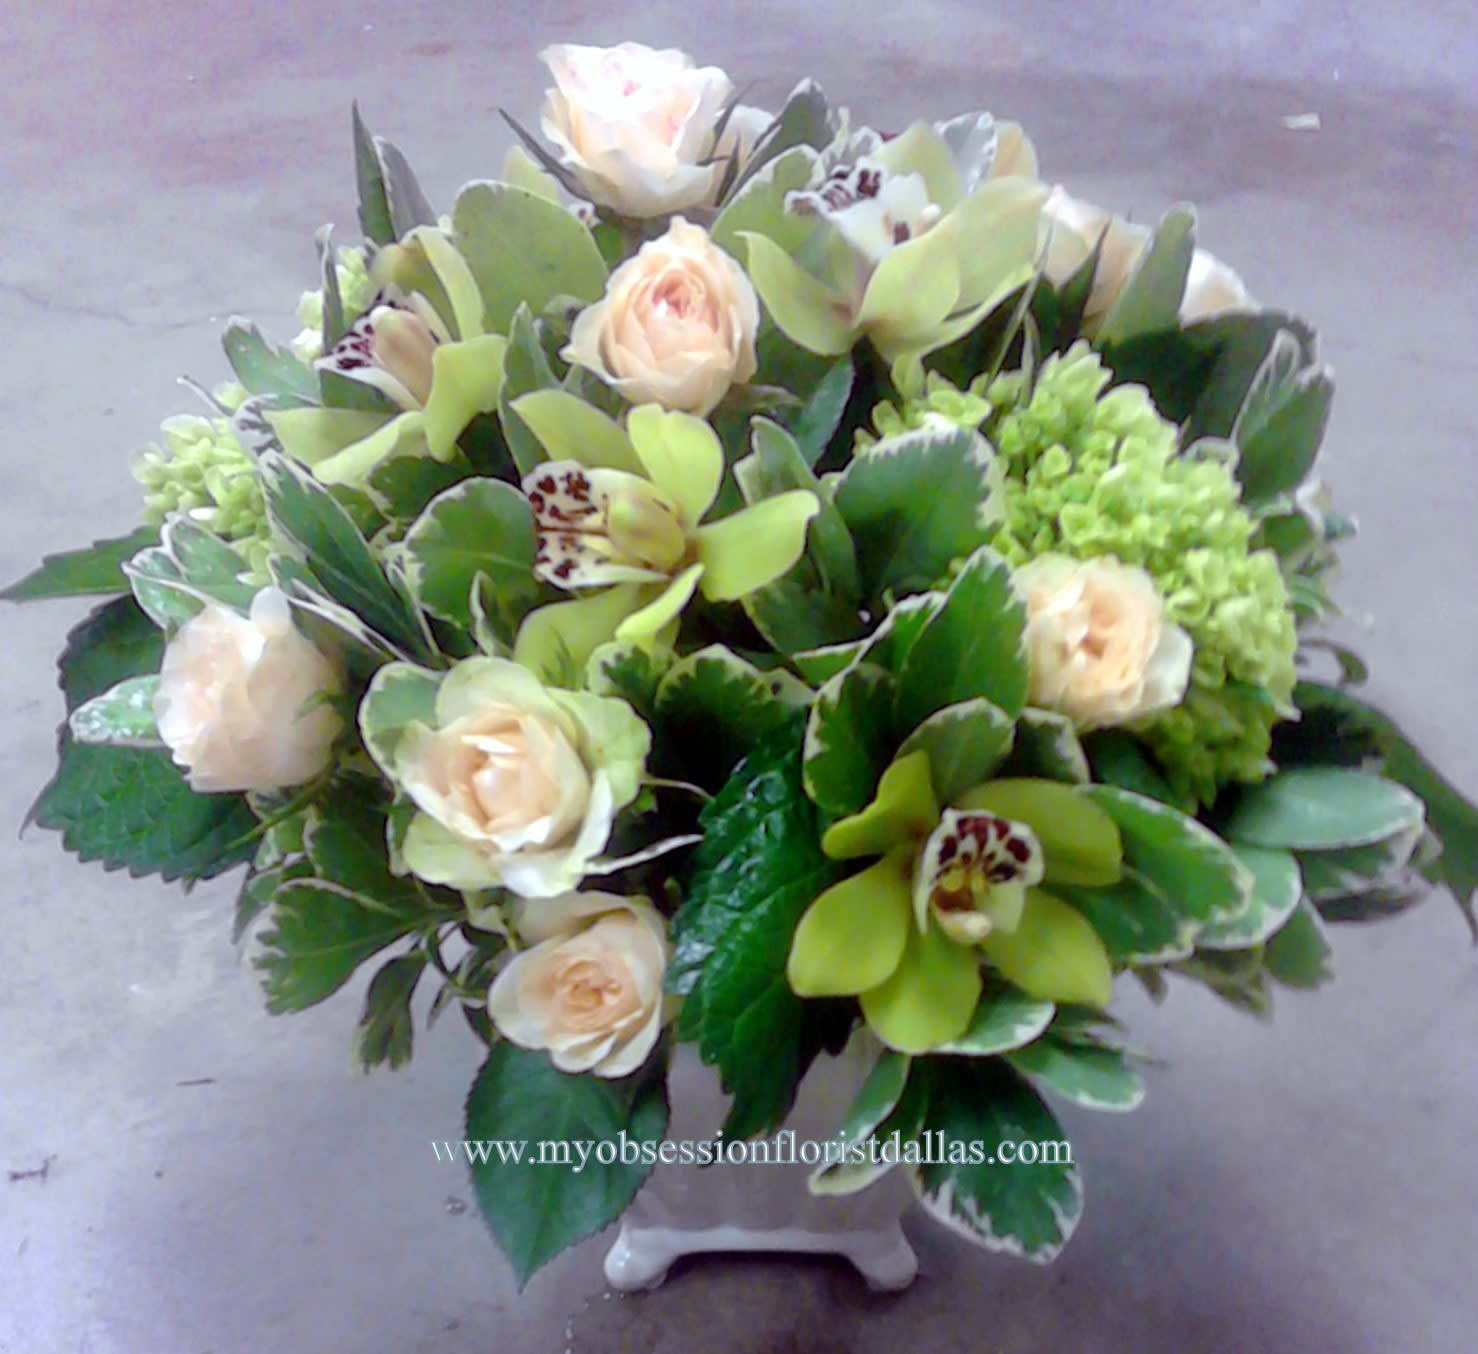 Green and peach, MO-206 - Green orchids, green hydrangea, and peach roses. Ah, it is adorable!